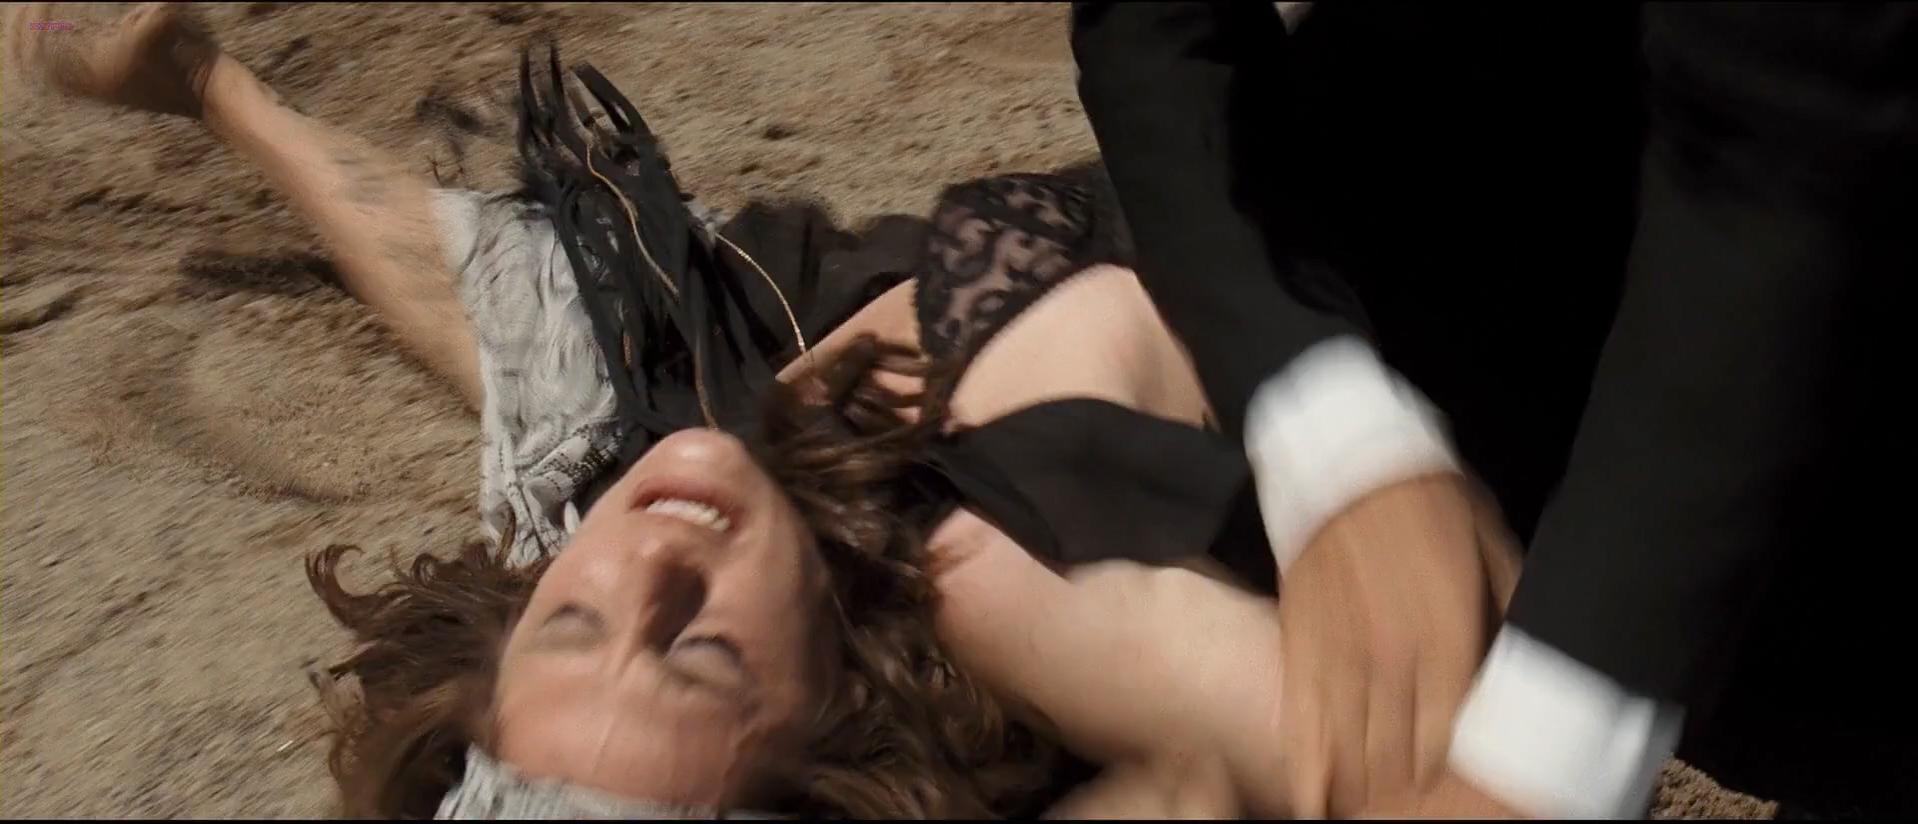 Stana Katic sexy - The Double (2011)